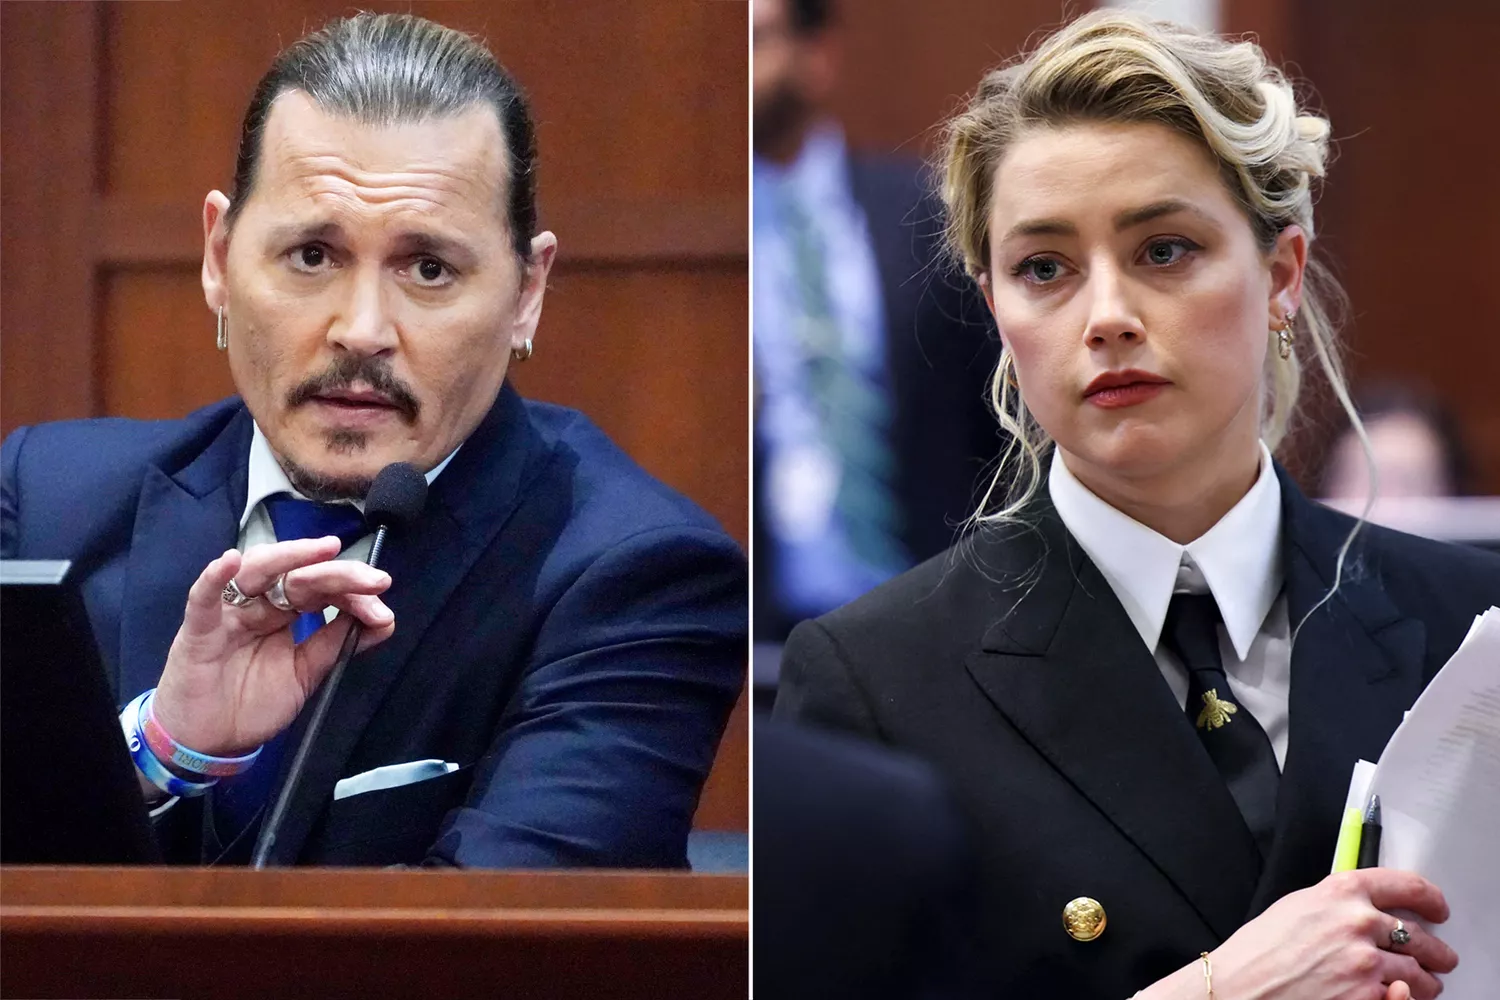 Amber Heard Pays Johnny Depp $1 Million Settlement 1 Year After Trial, Depp to Donate It to 5 Charities 12